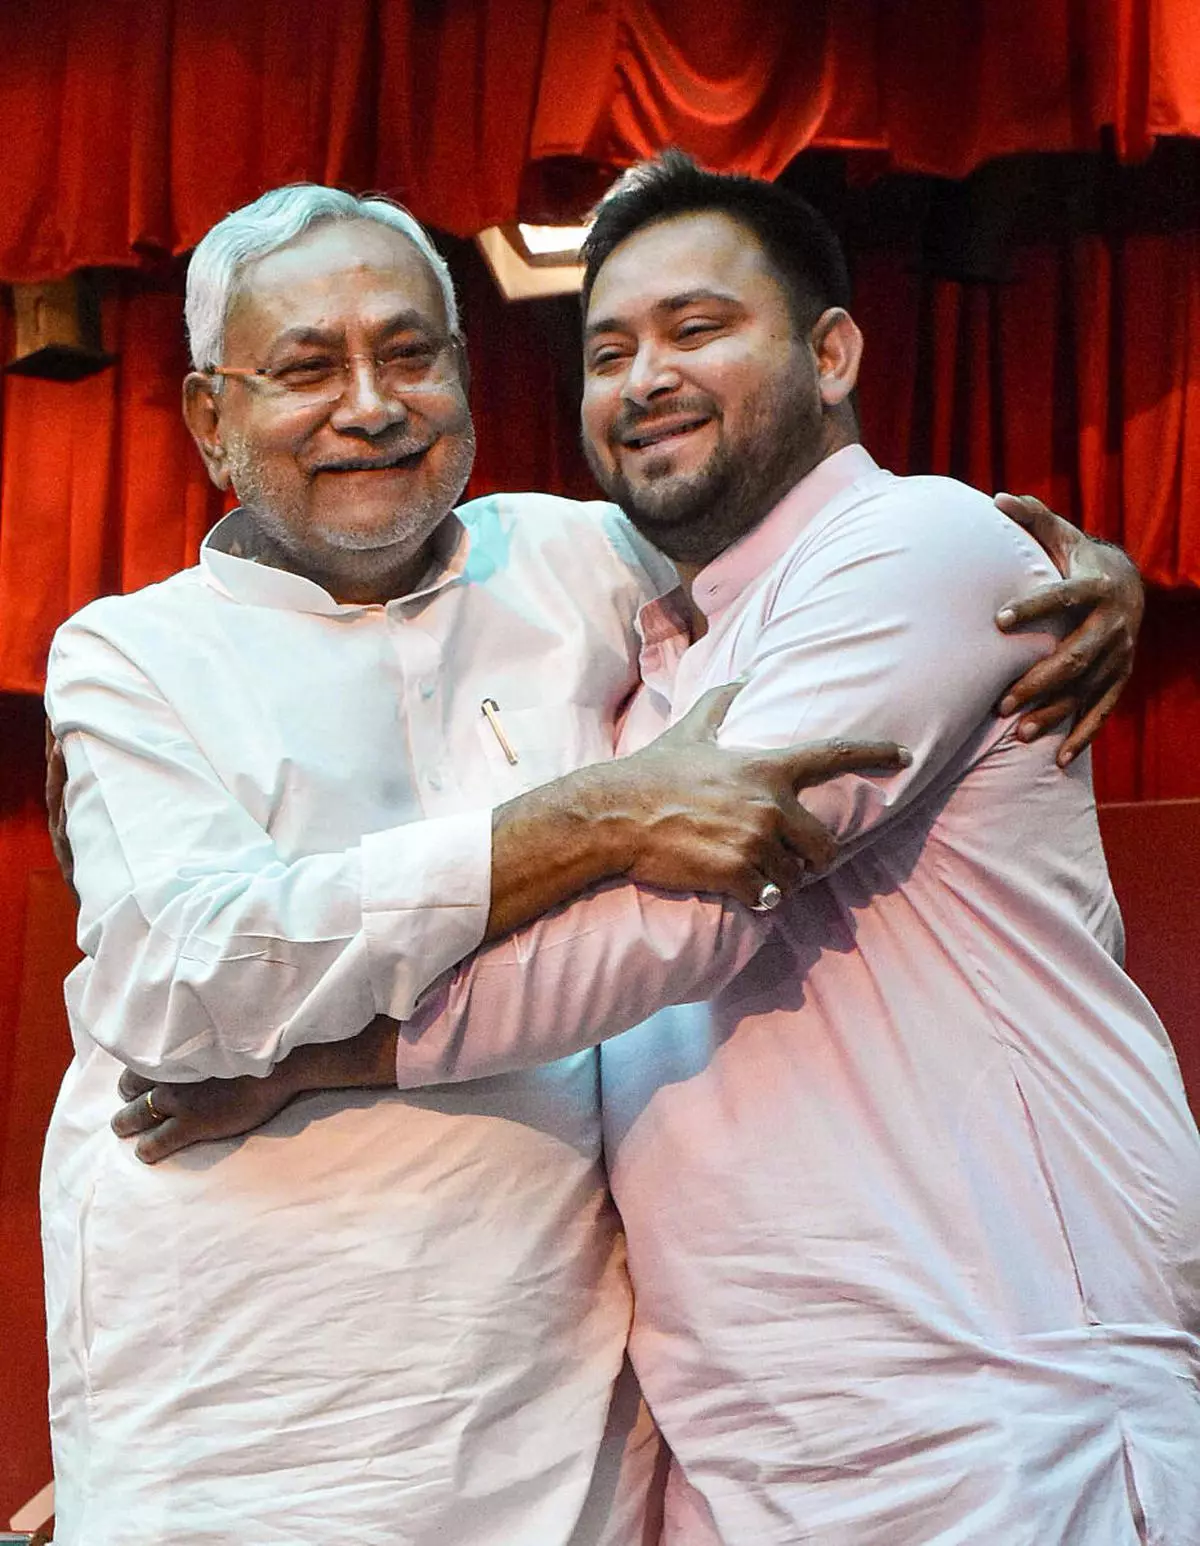 Bihar Chief Minister Nitish Kumar being greeted by Deputy Chief Minister Tejashwi Yadav after taking oath, at Raj Bhavan in Patna, Wednesday, August 10, 2022. (PTI)